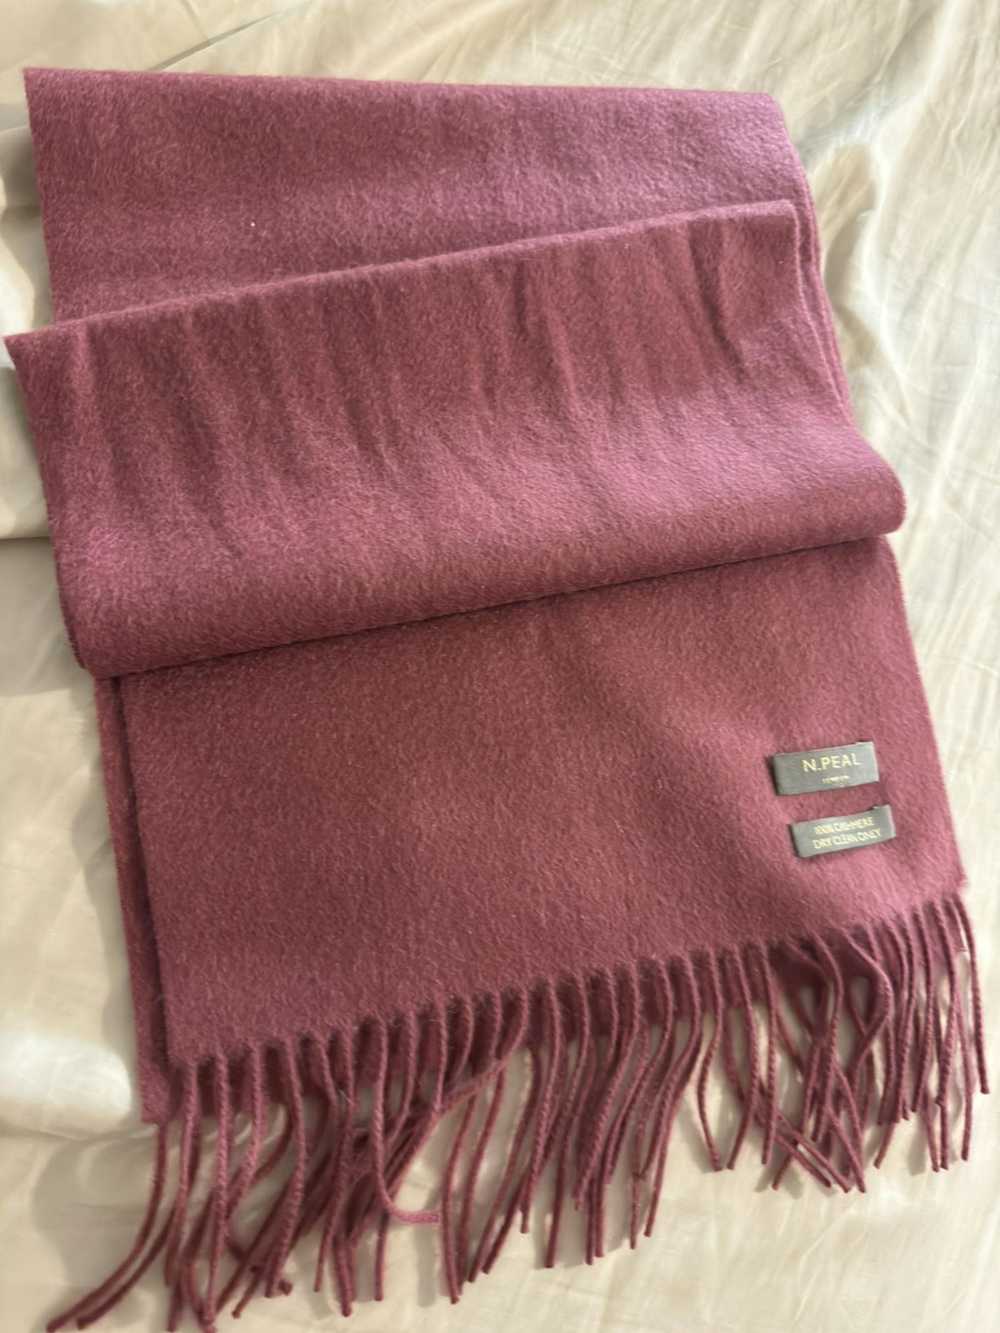 N. Peal Pure cashmere scarf - image 2